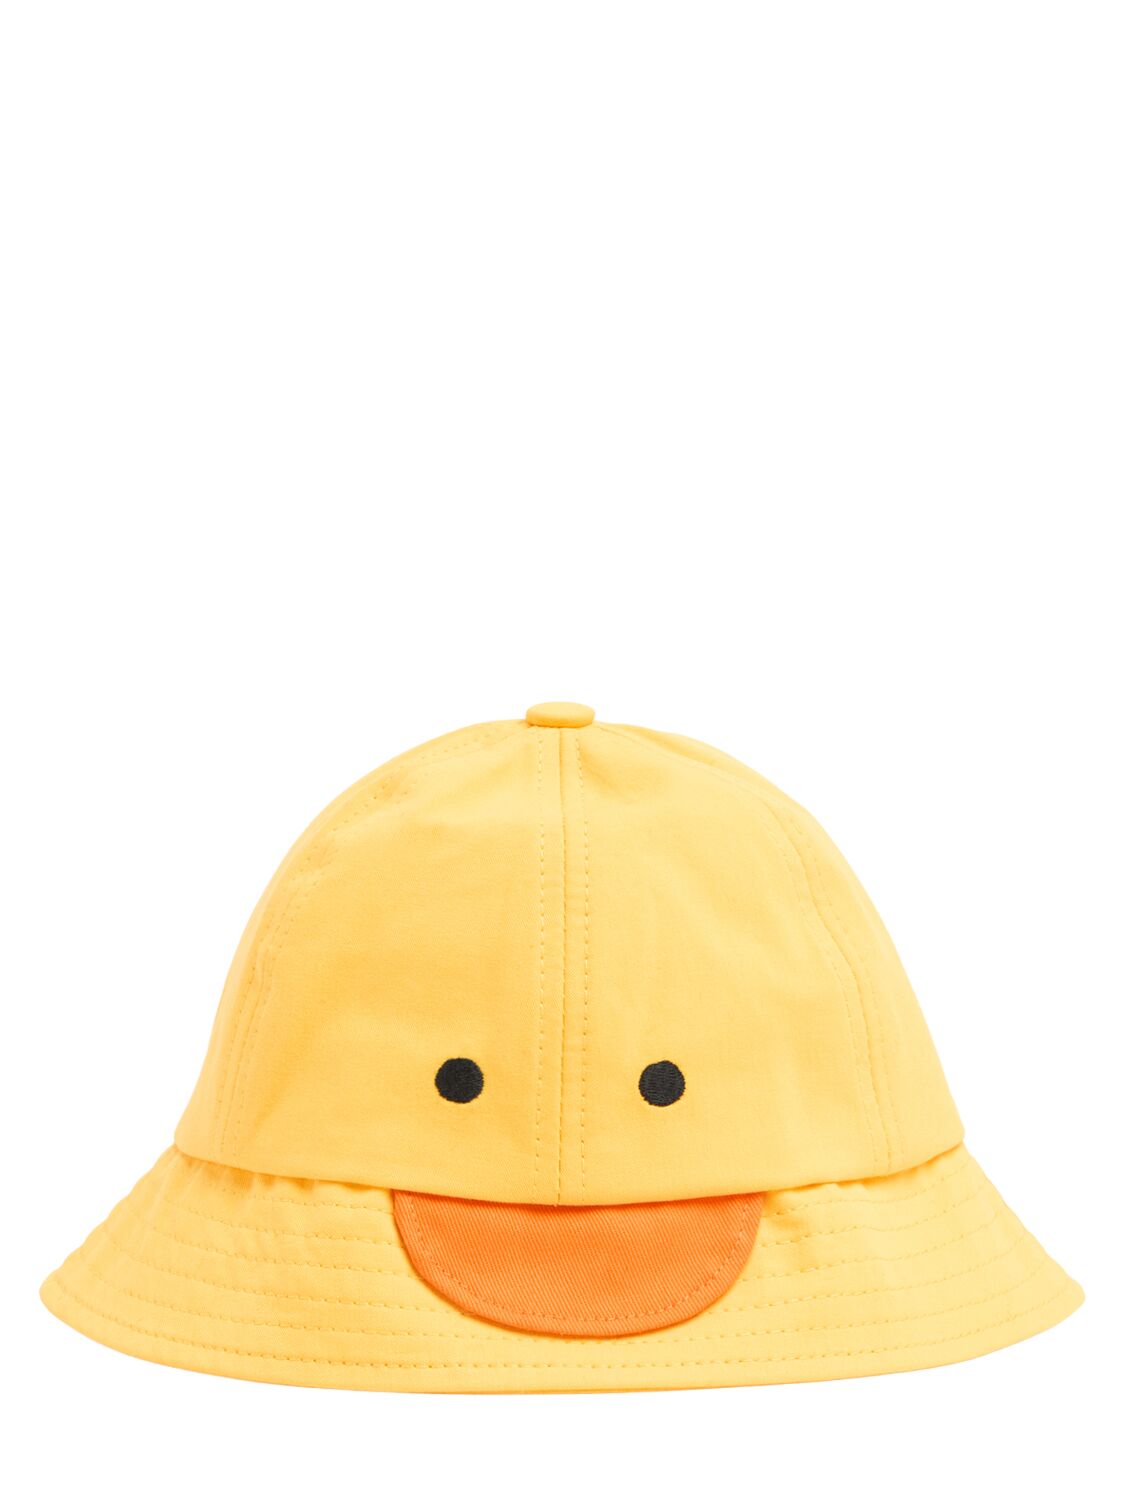 Image of Cotton Canvas Bucket Hat